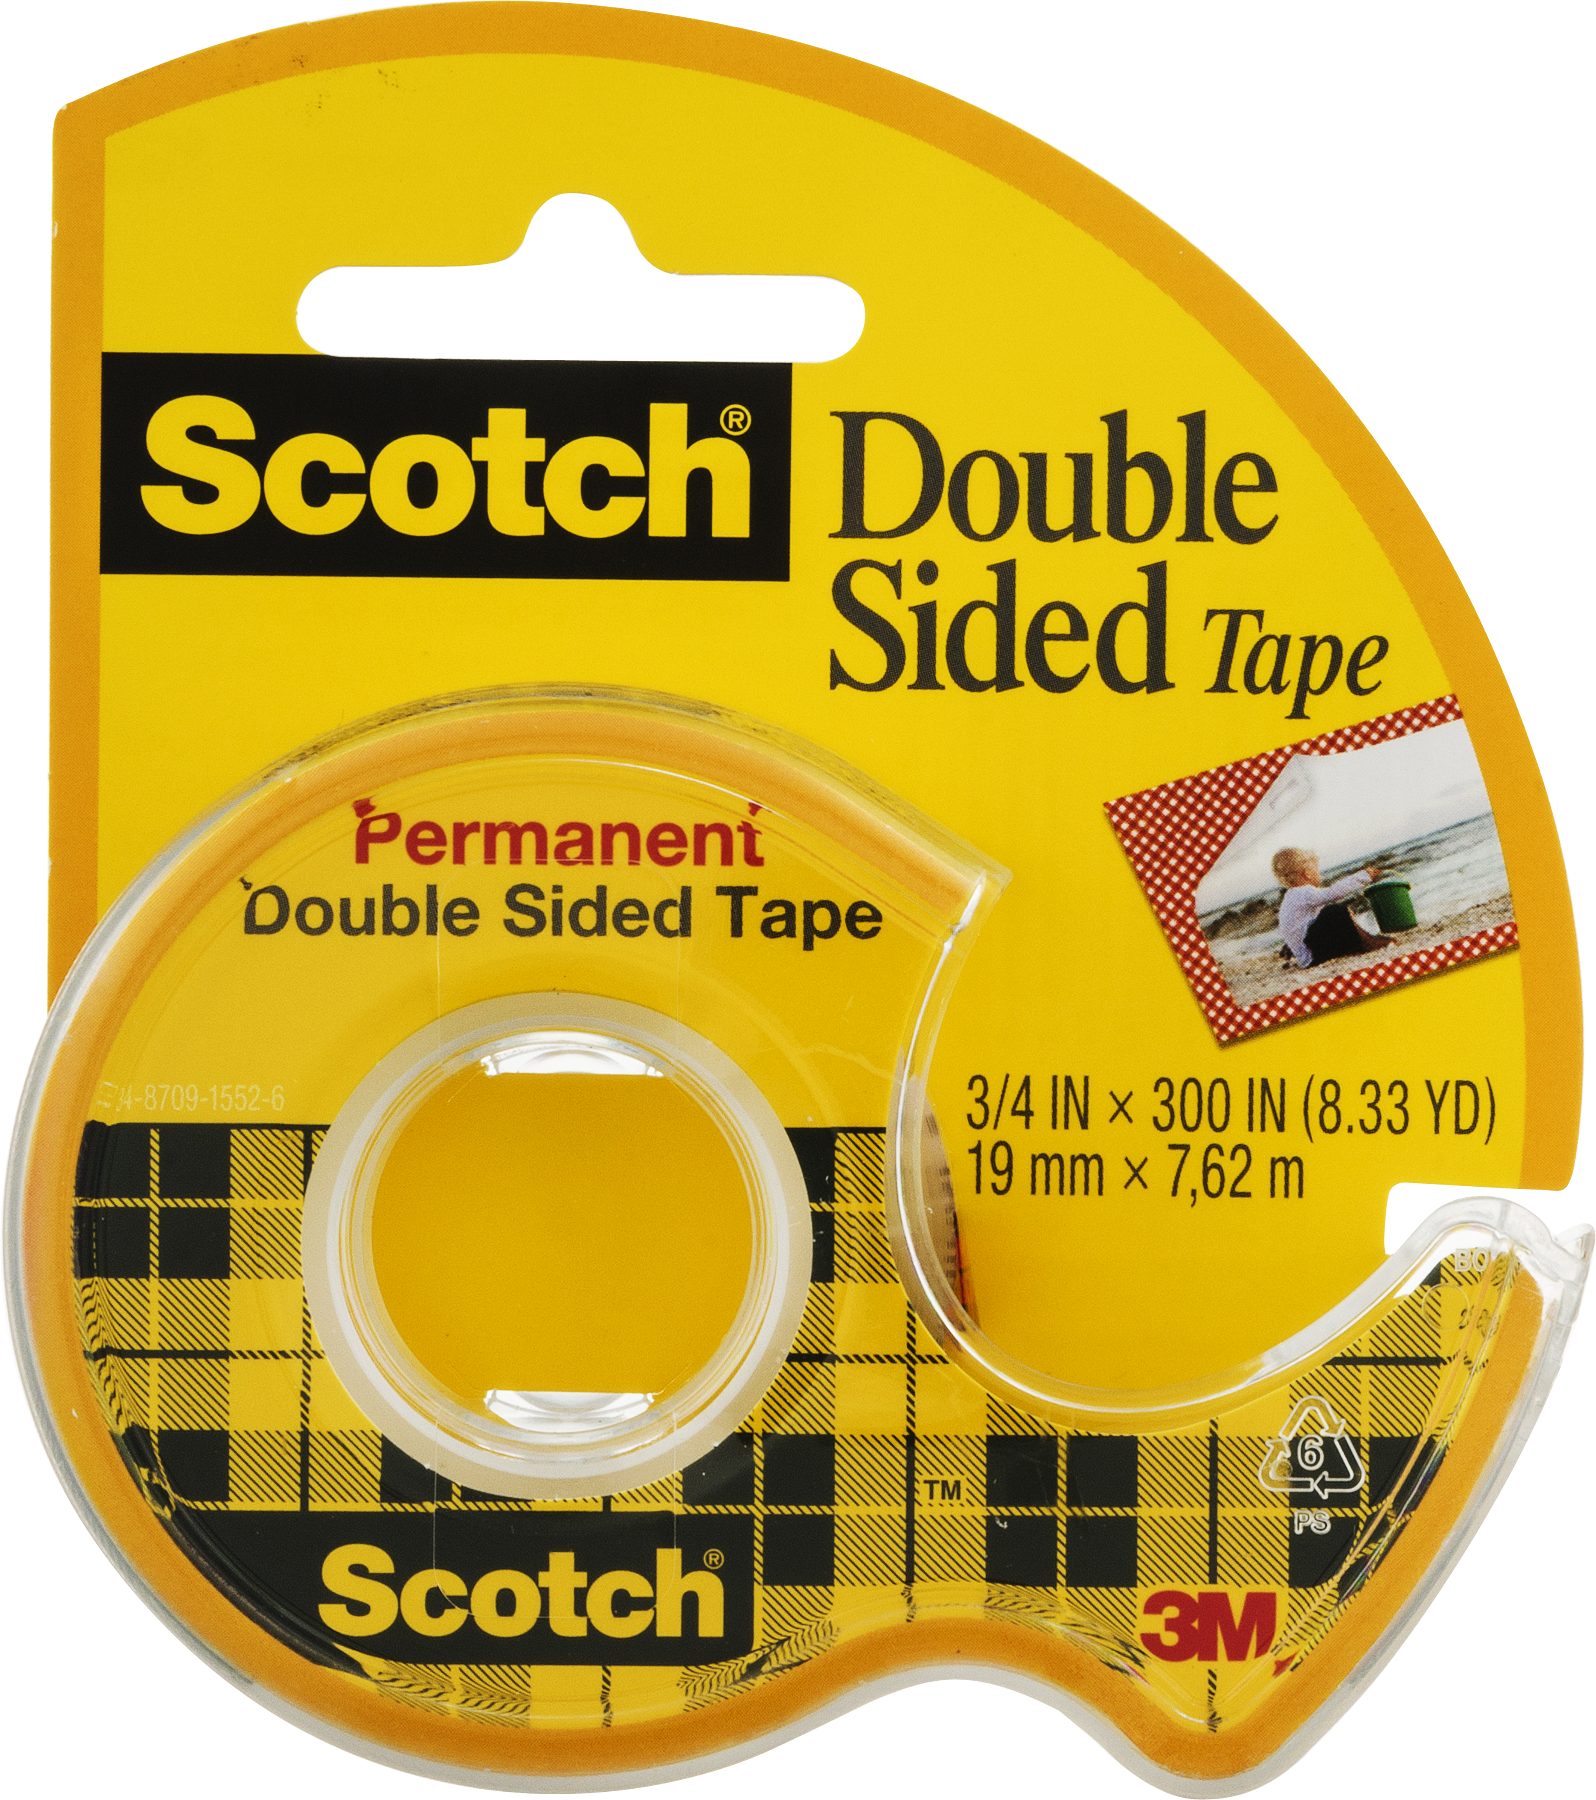 A Yellow And Black Tape In A Package